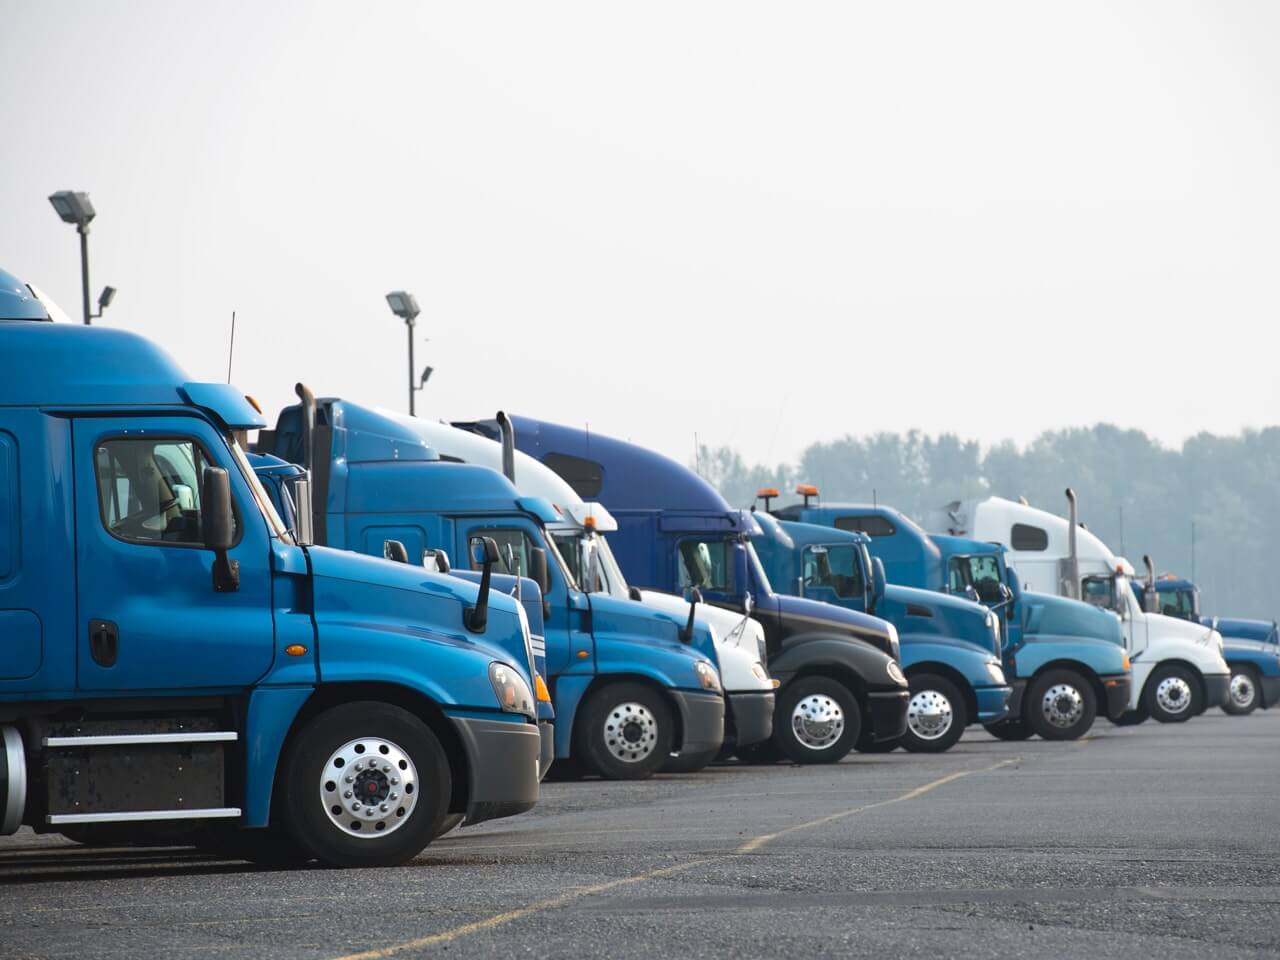 Row of unbranded fuel trucks